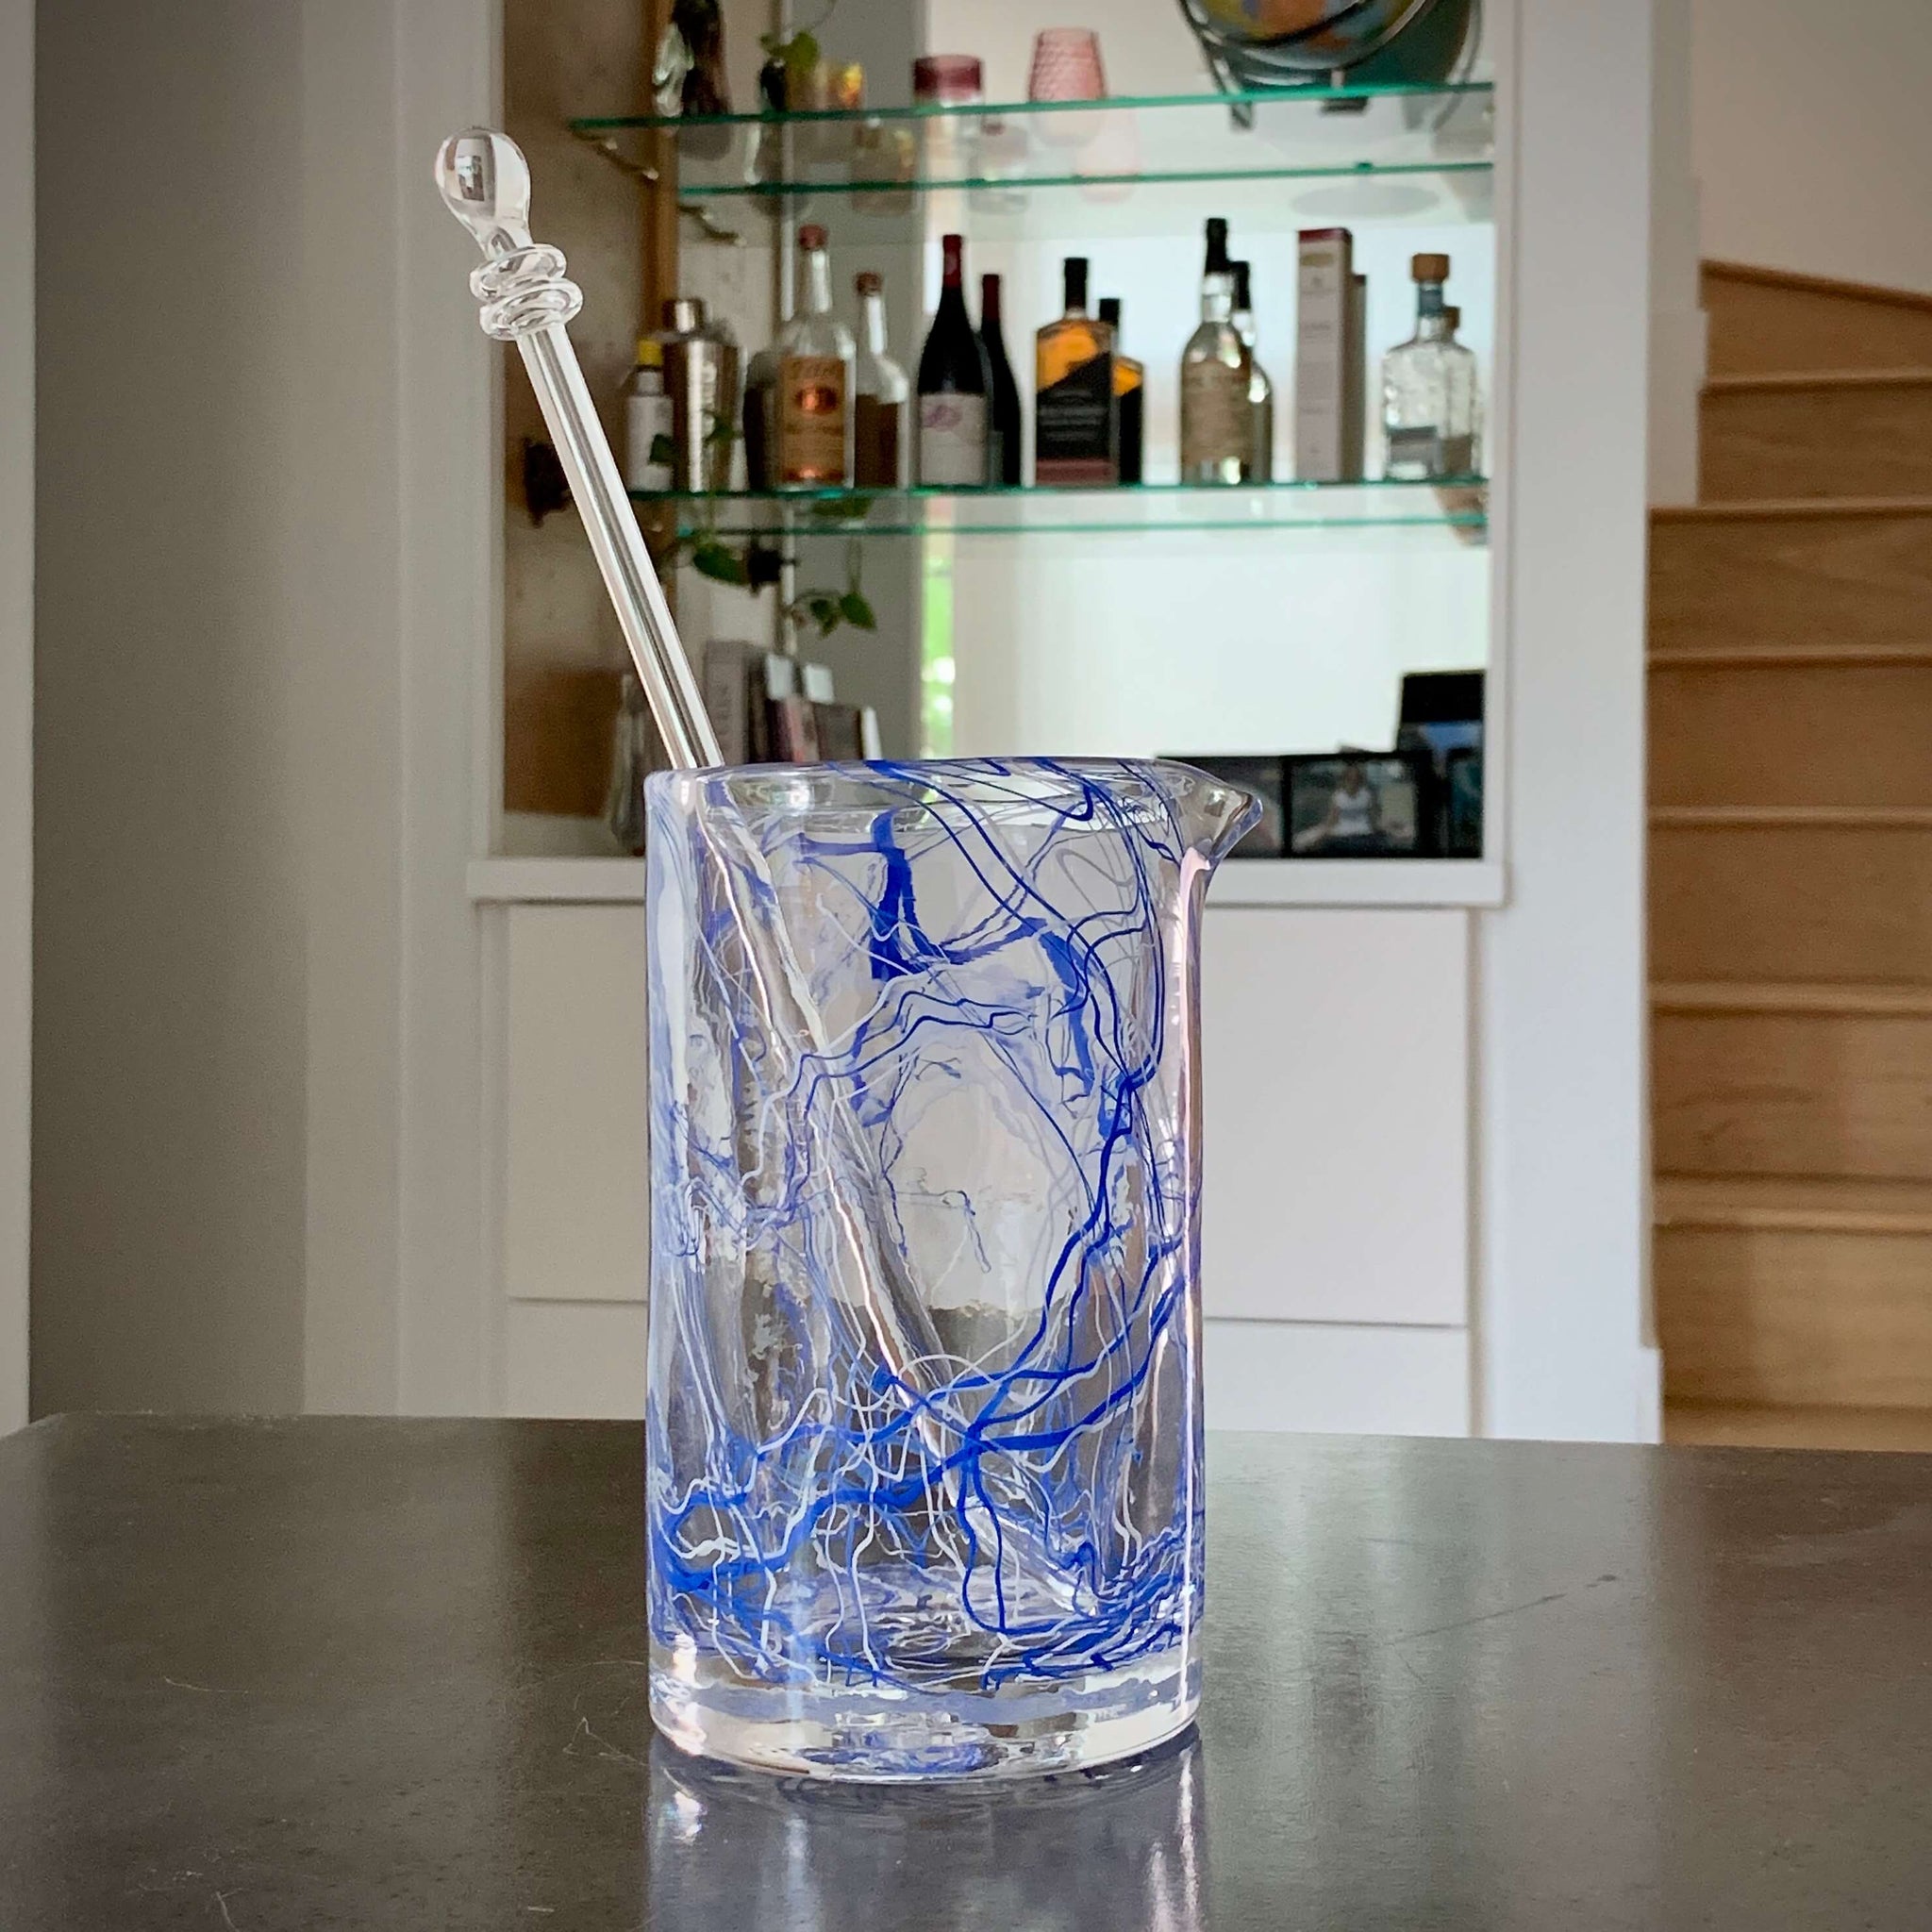 The Strada in Blue Mixing Glass